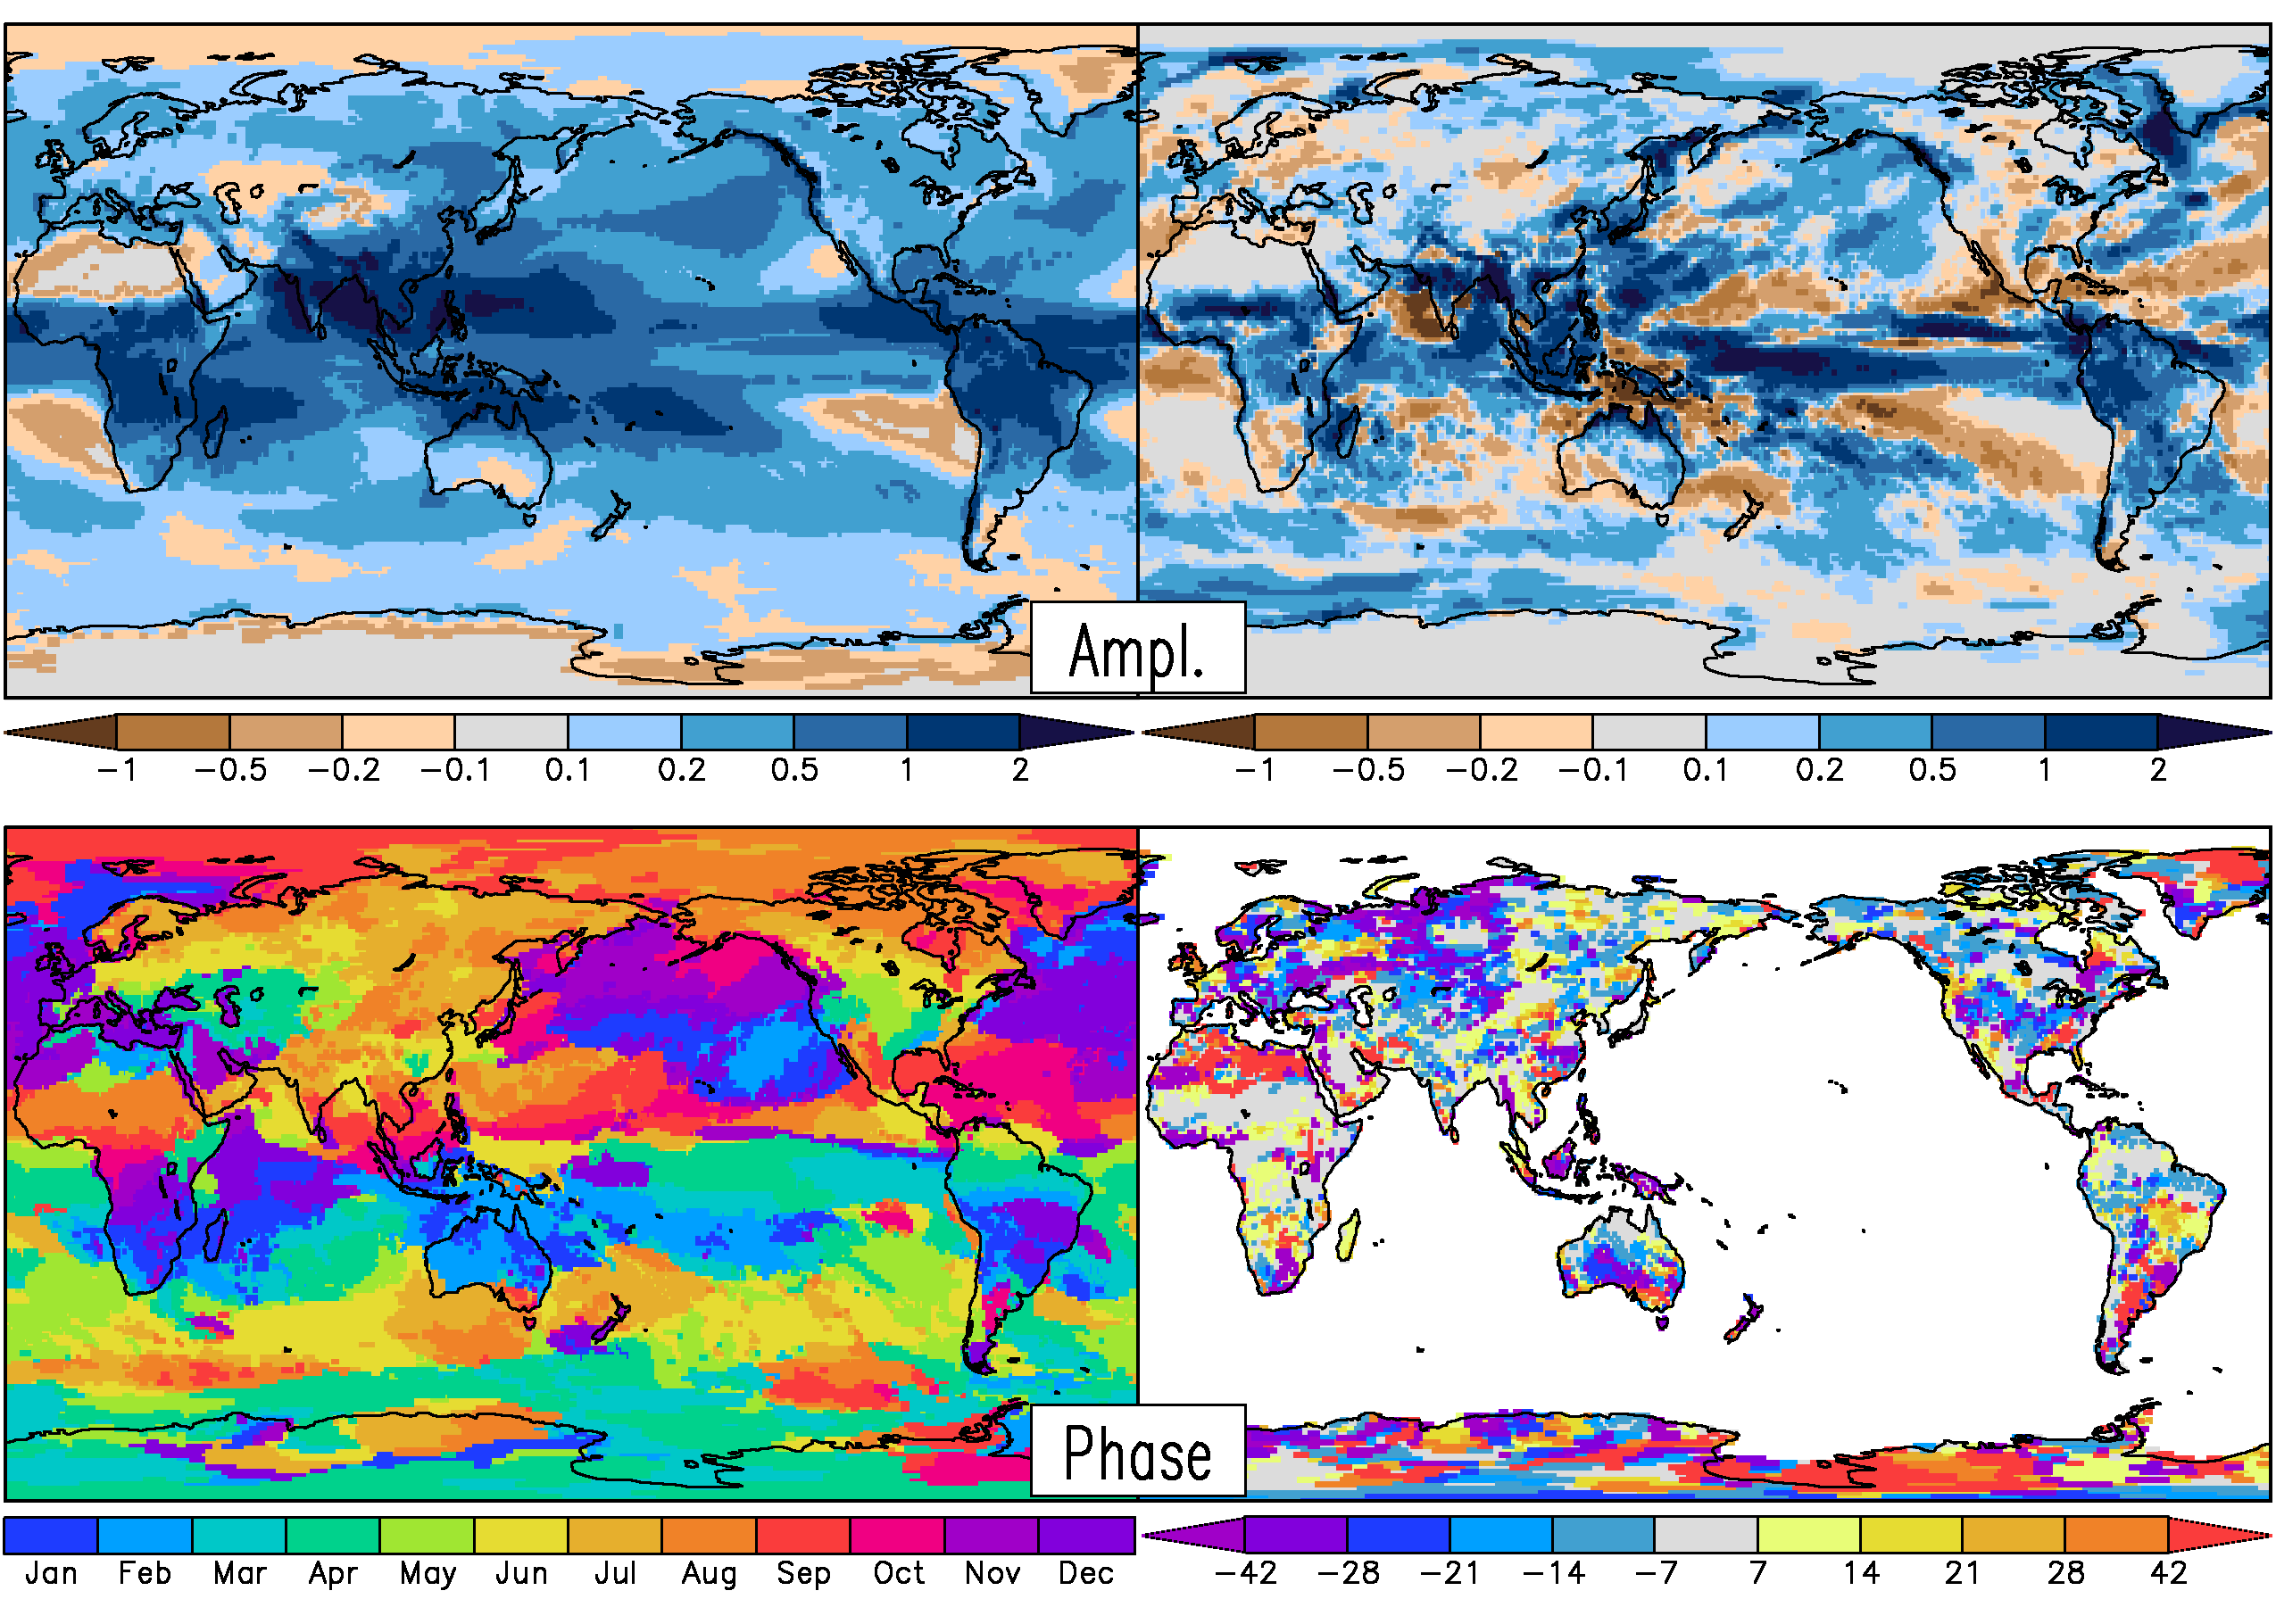 EVIDENCE FOR ENHANCED LANDATMOSPHERE FEEDBACK IN A WARMING CLIMATE